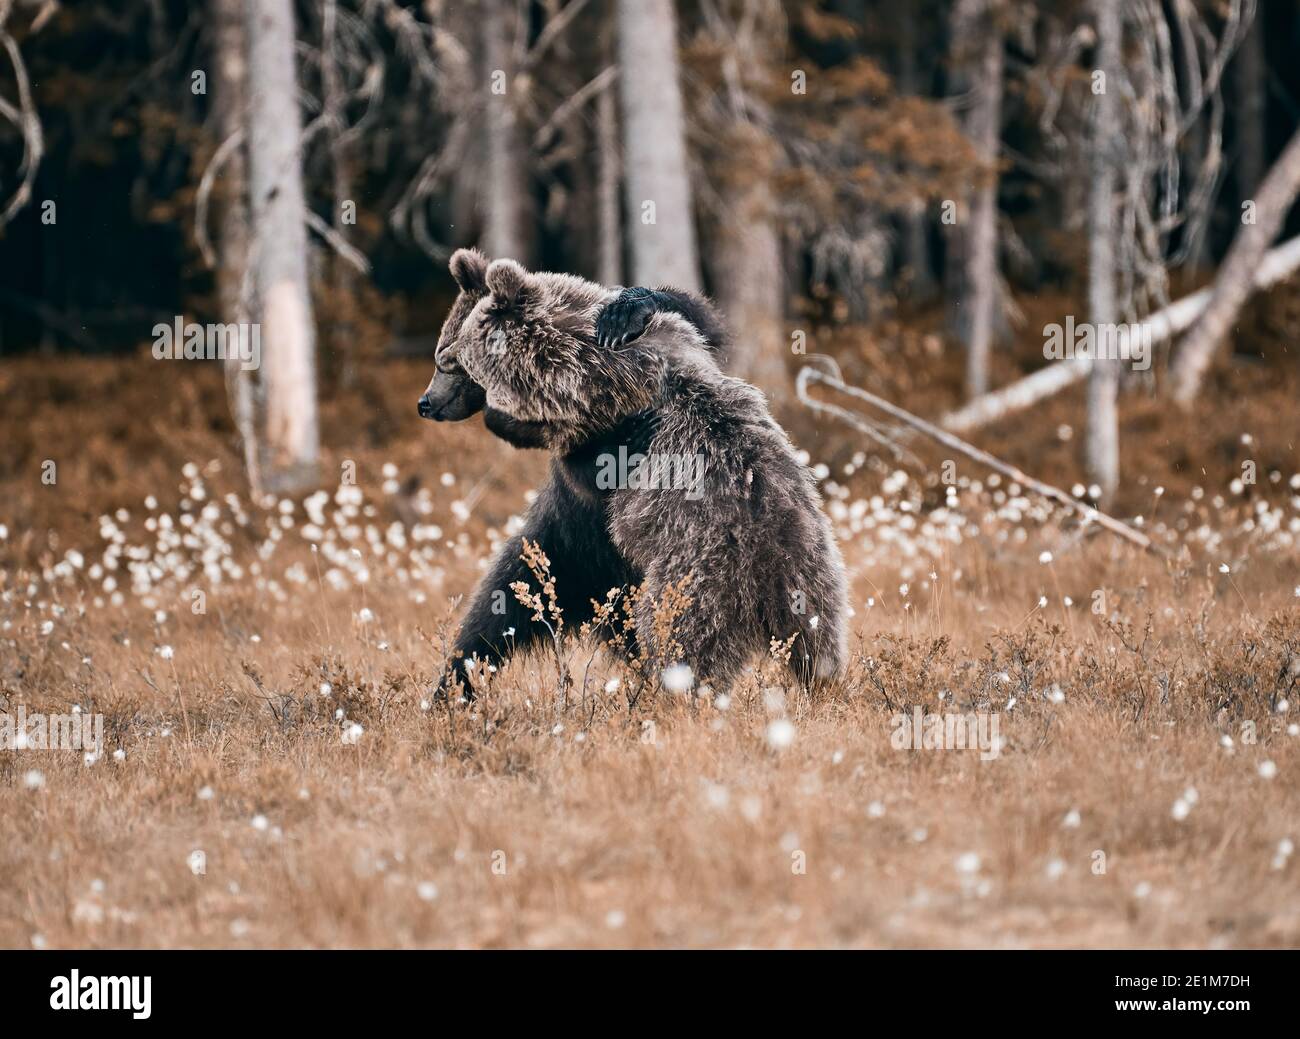 Young brown bear kissing and hugging another bear at edge of forest in Eastern Finland on summer evening. Stock Photo